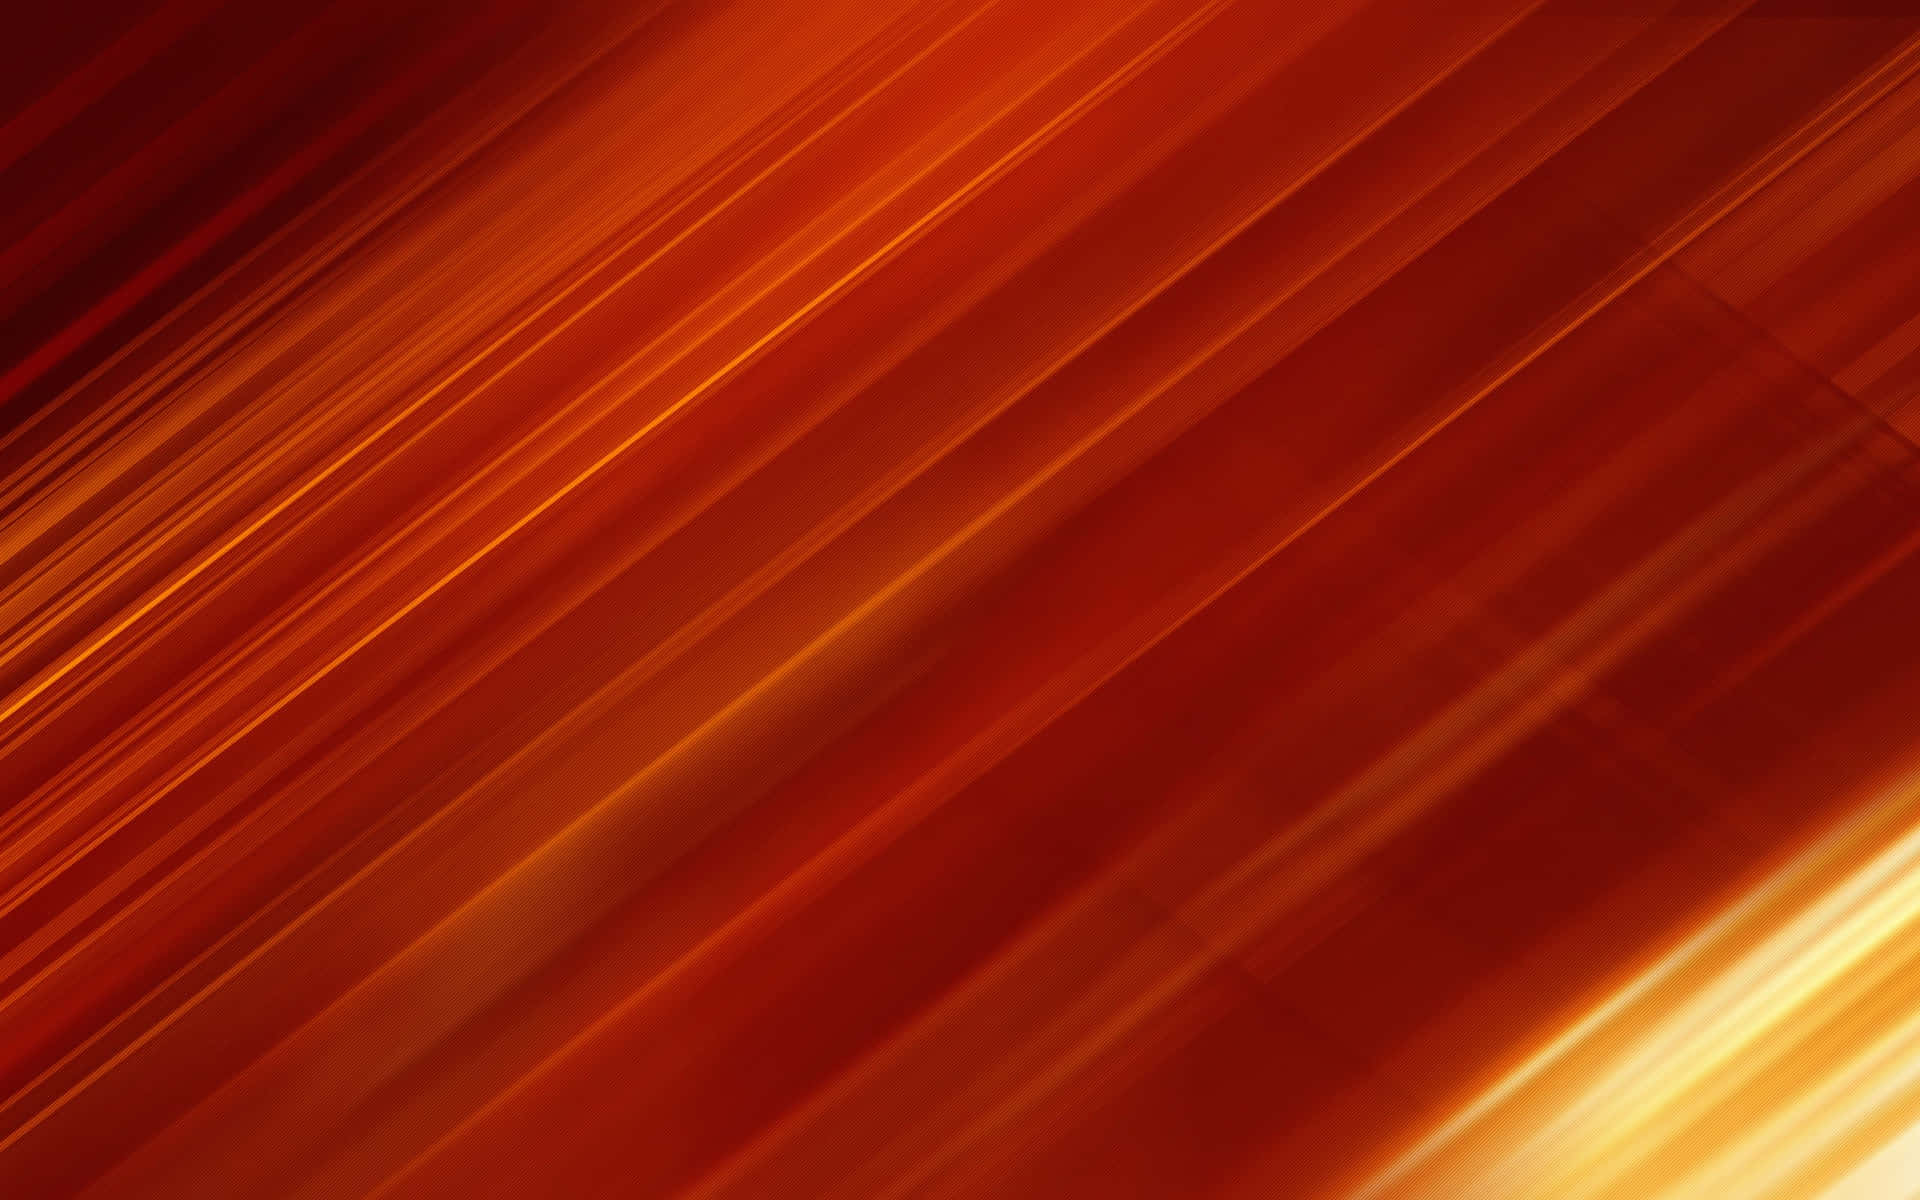 Rich Red&Gold Background